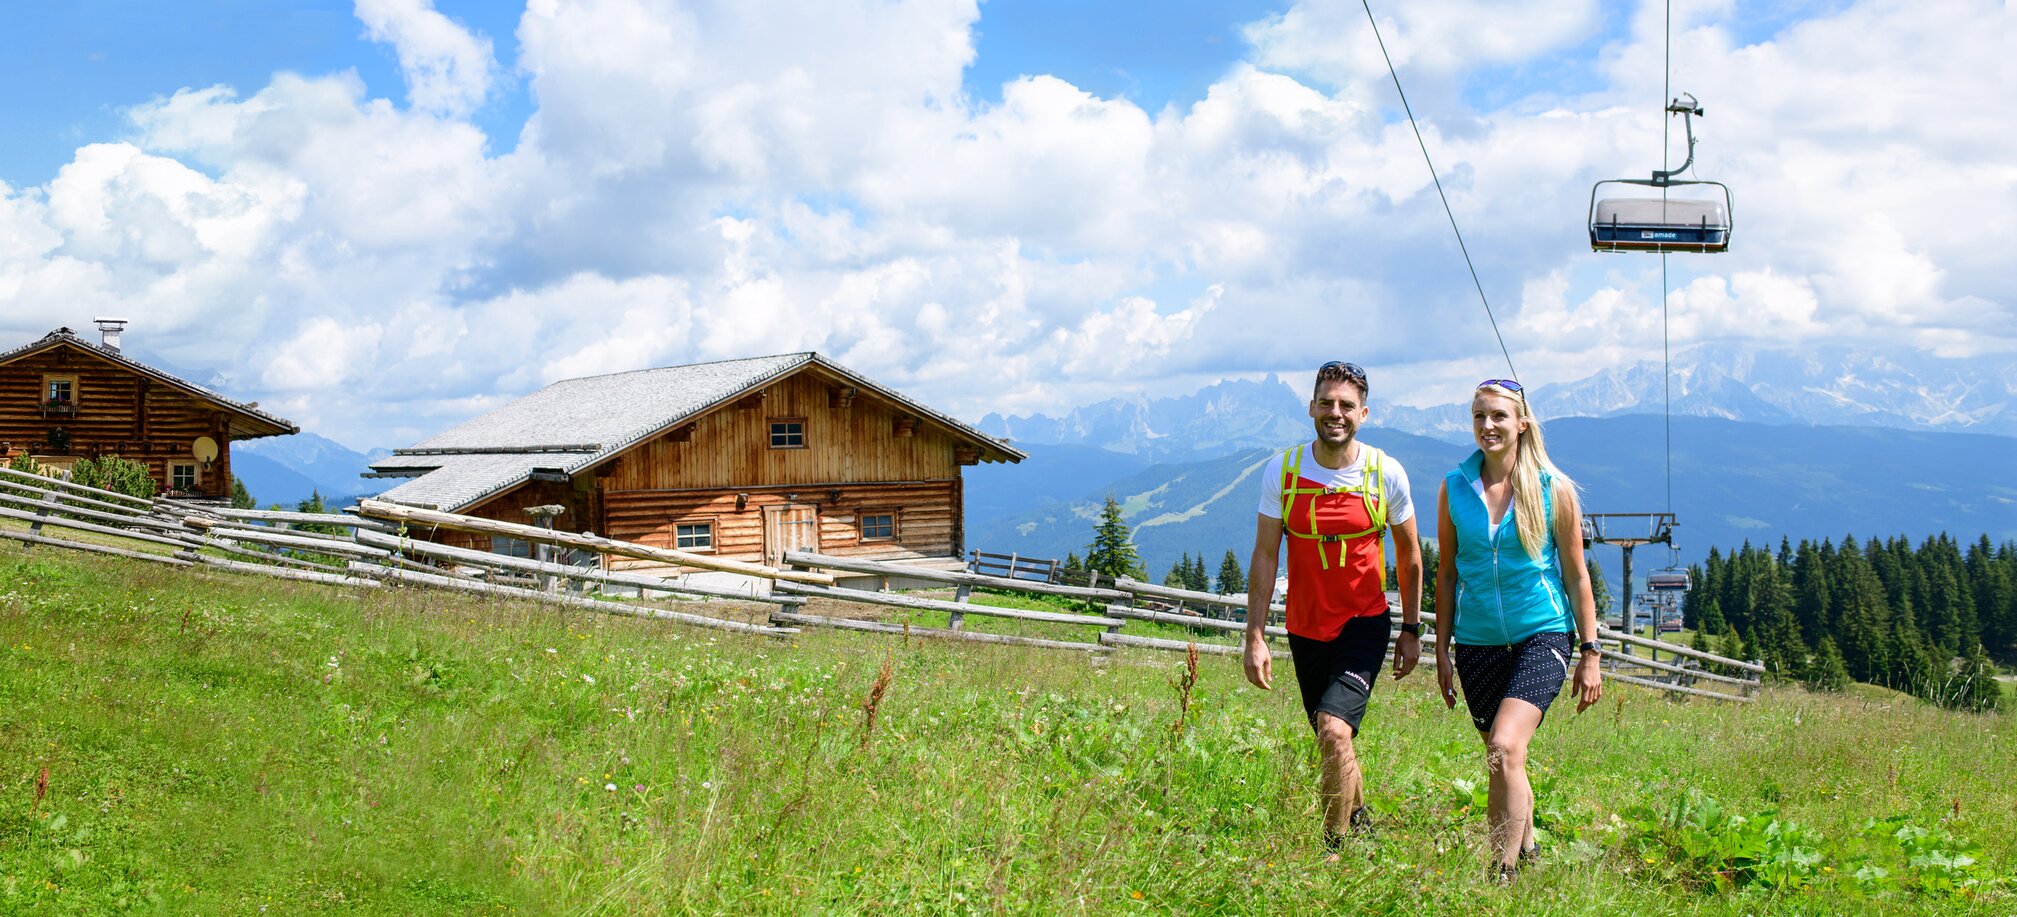 Walking, hiking and mountainbiking on the mountain during summer time with Ski amadé summer lifts